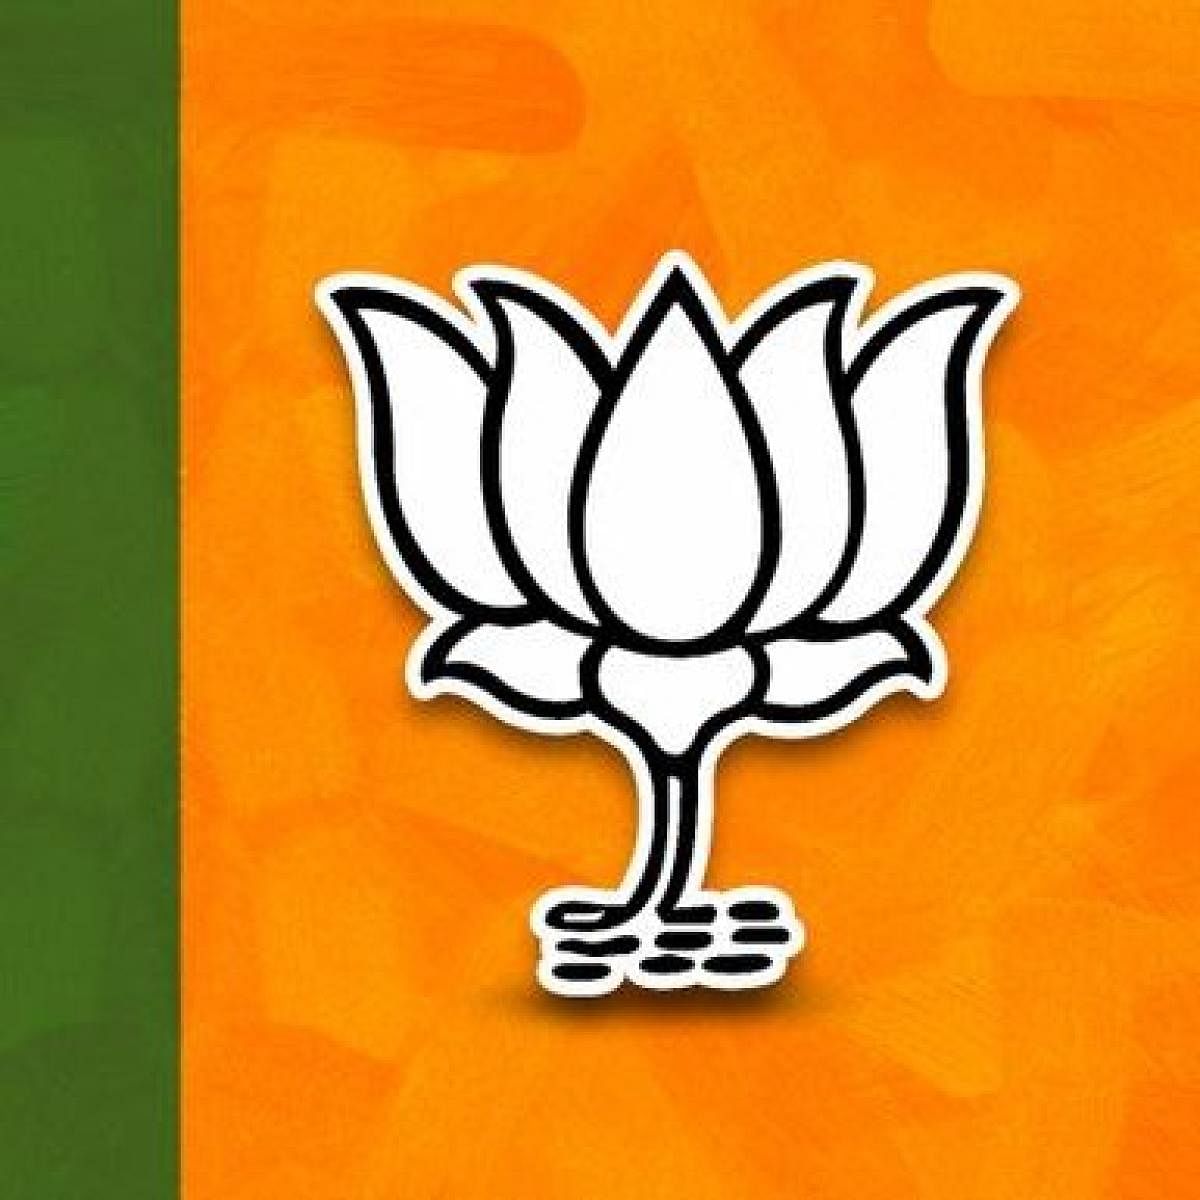 'BJP using Ayodhya to divert attention from failures'